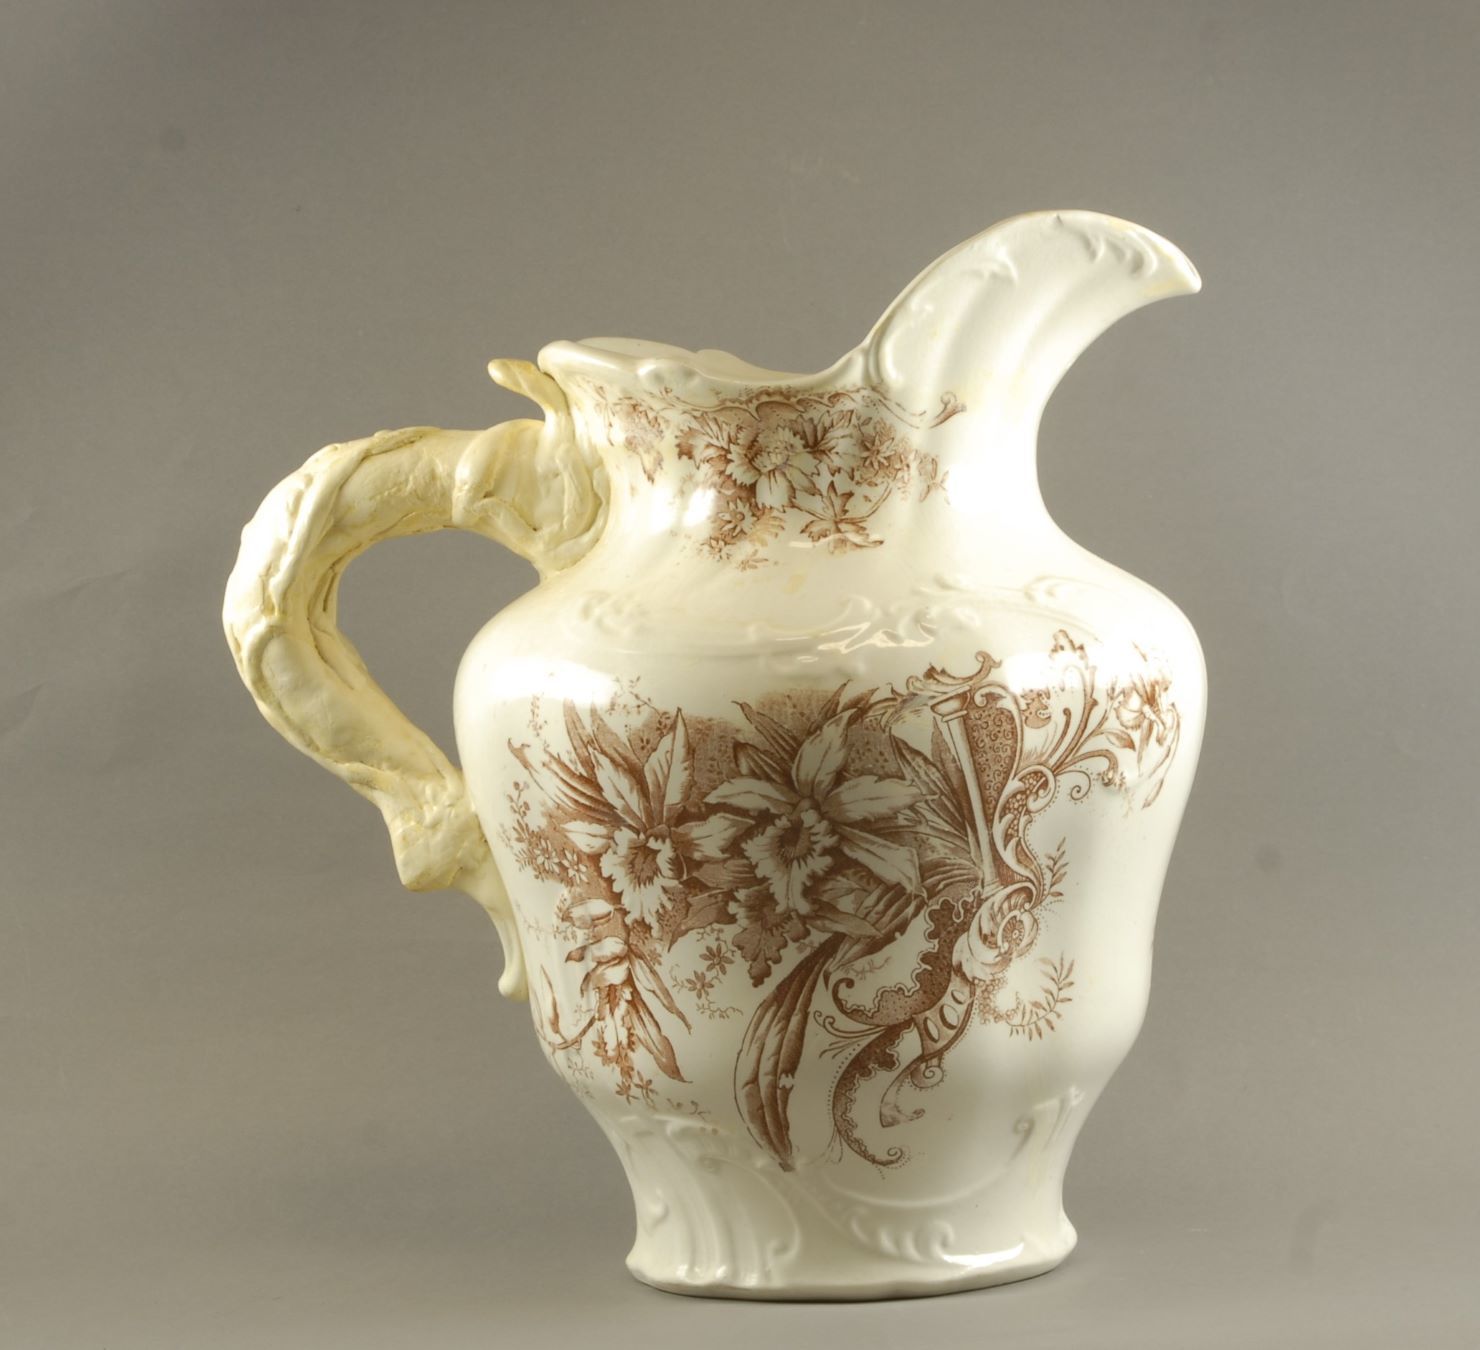 Are historic repairs to this ceramic jug part of its story or should it be restored to its original form? 